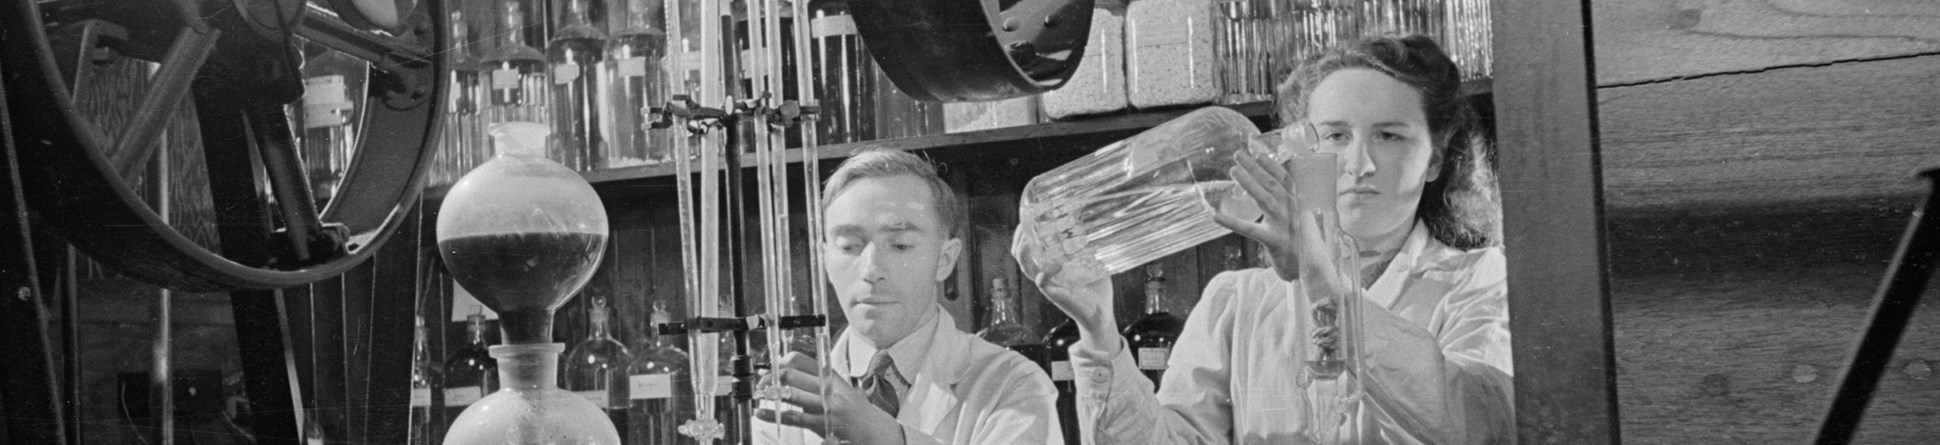 Man and woman working with scientific equipment.